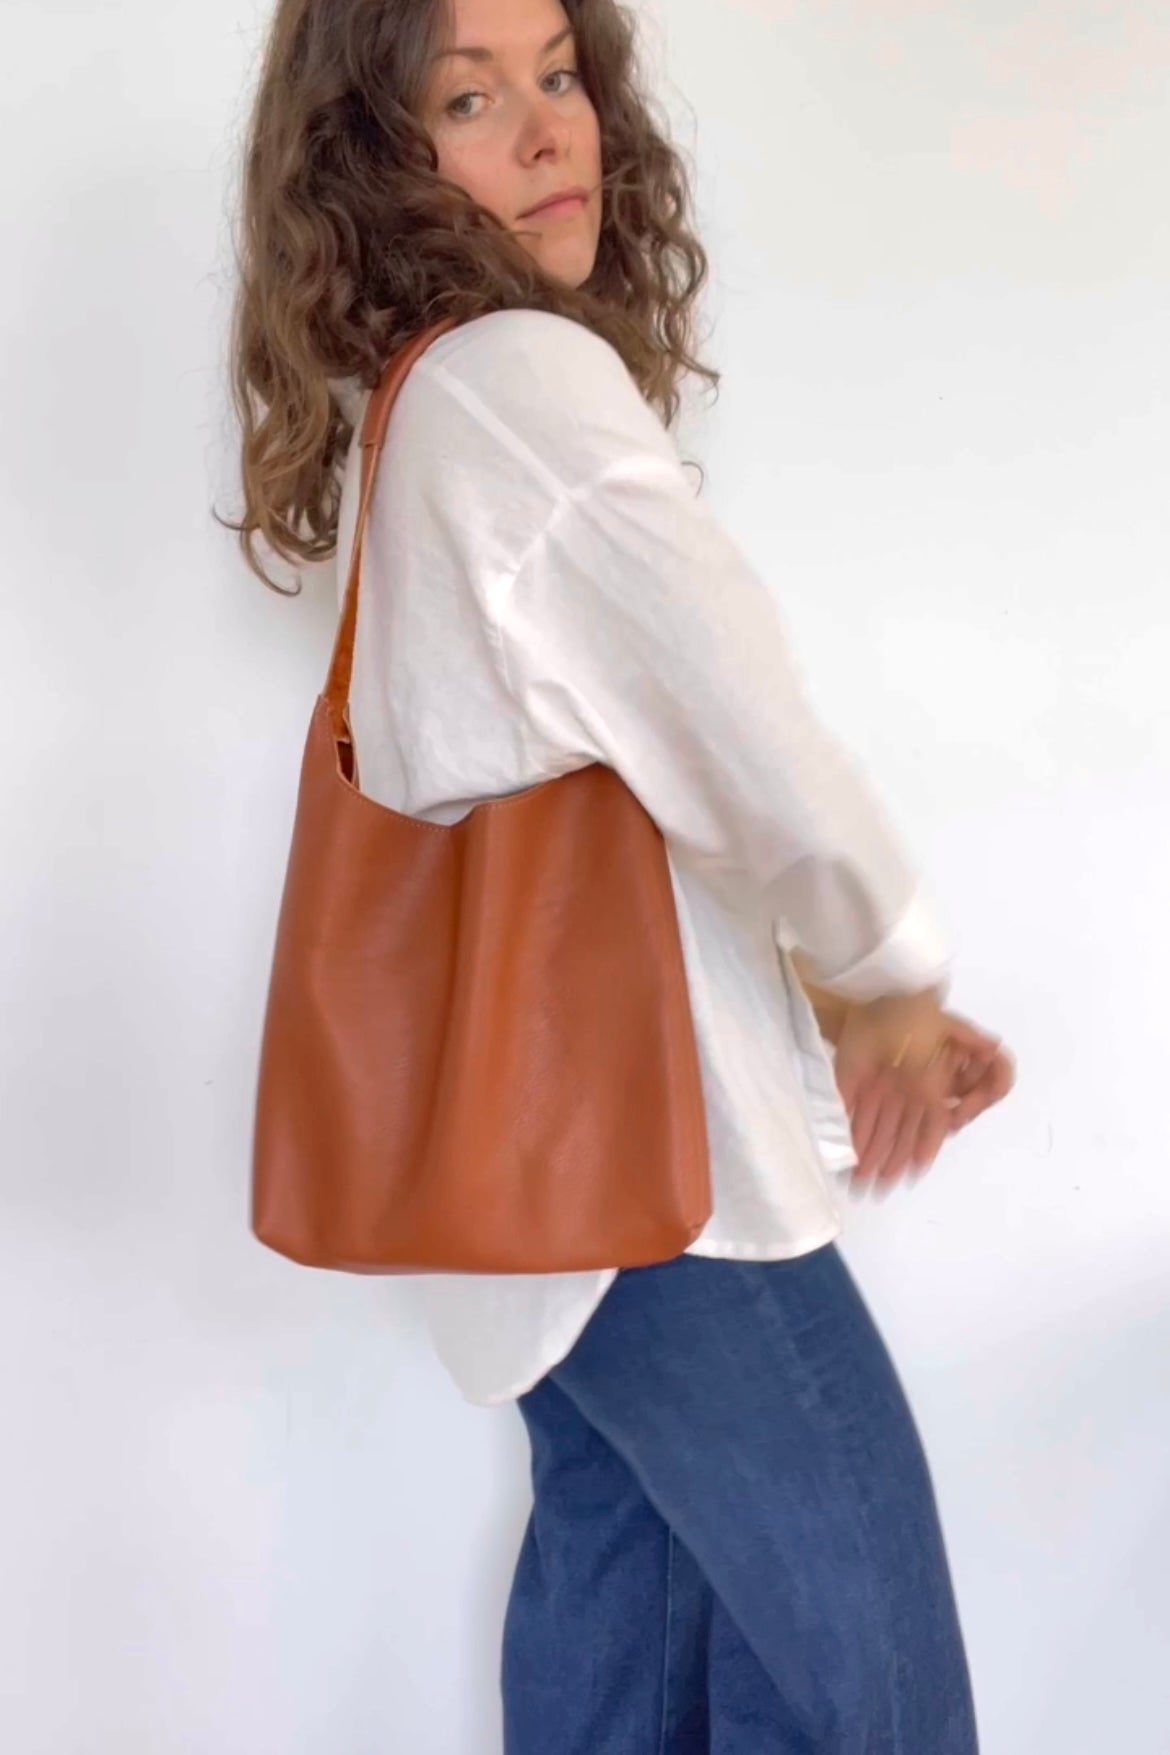 Leather 70's Tote Bag Leather Bag - handcrafted by Market Canvas Leather in Tofino, BC, Canada